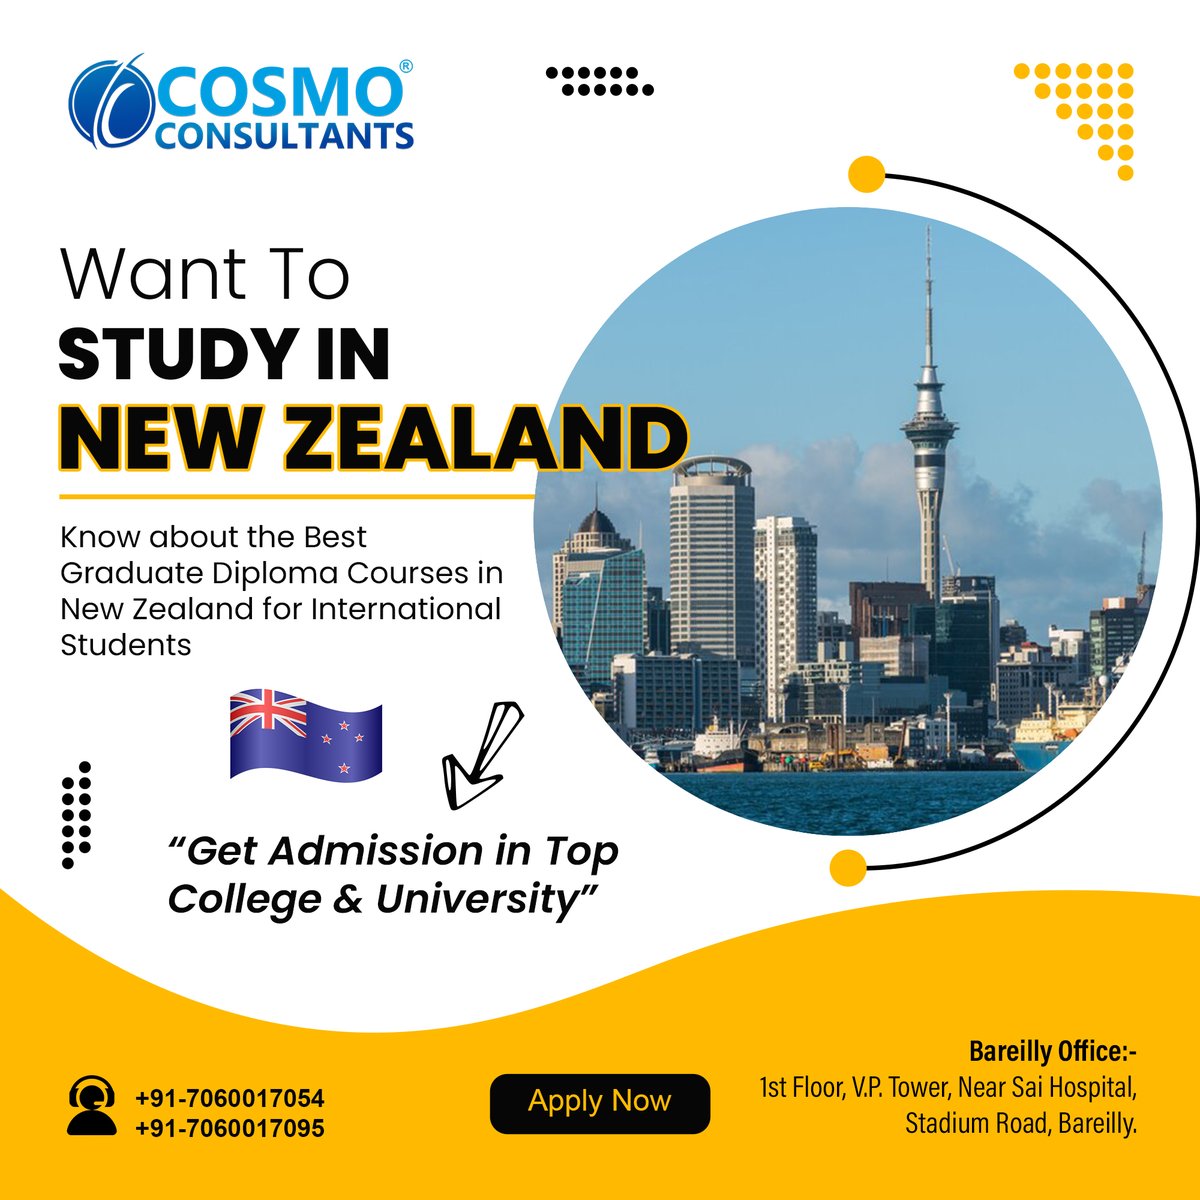 Want to Study in New Zealand 🇳🇿
Know about the best Graduate Diploma Courses in New Zealand for International Students bit.ly/4cQlIA5

For more information reach us: +91-7060017054, +91-7060017095.

#CosmoConsultants #NewZealand #Graduate #Diploma #StudyInNewZealand